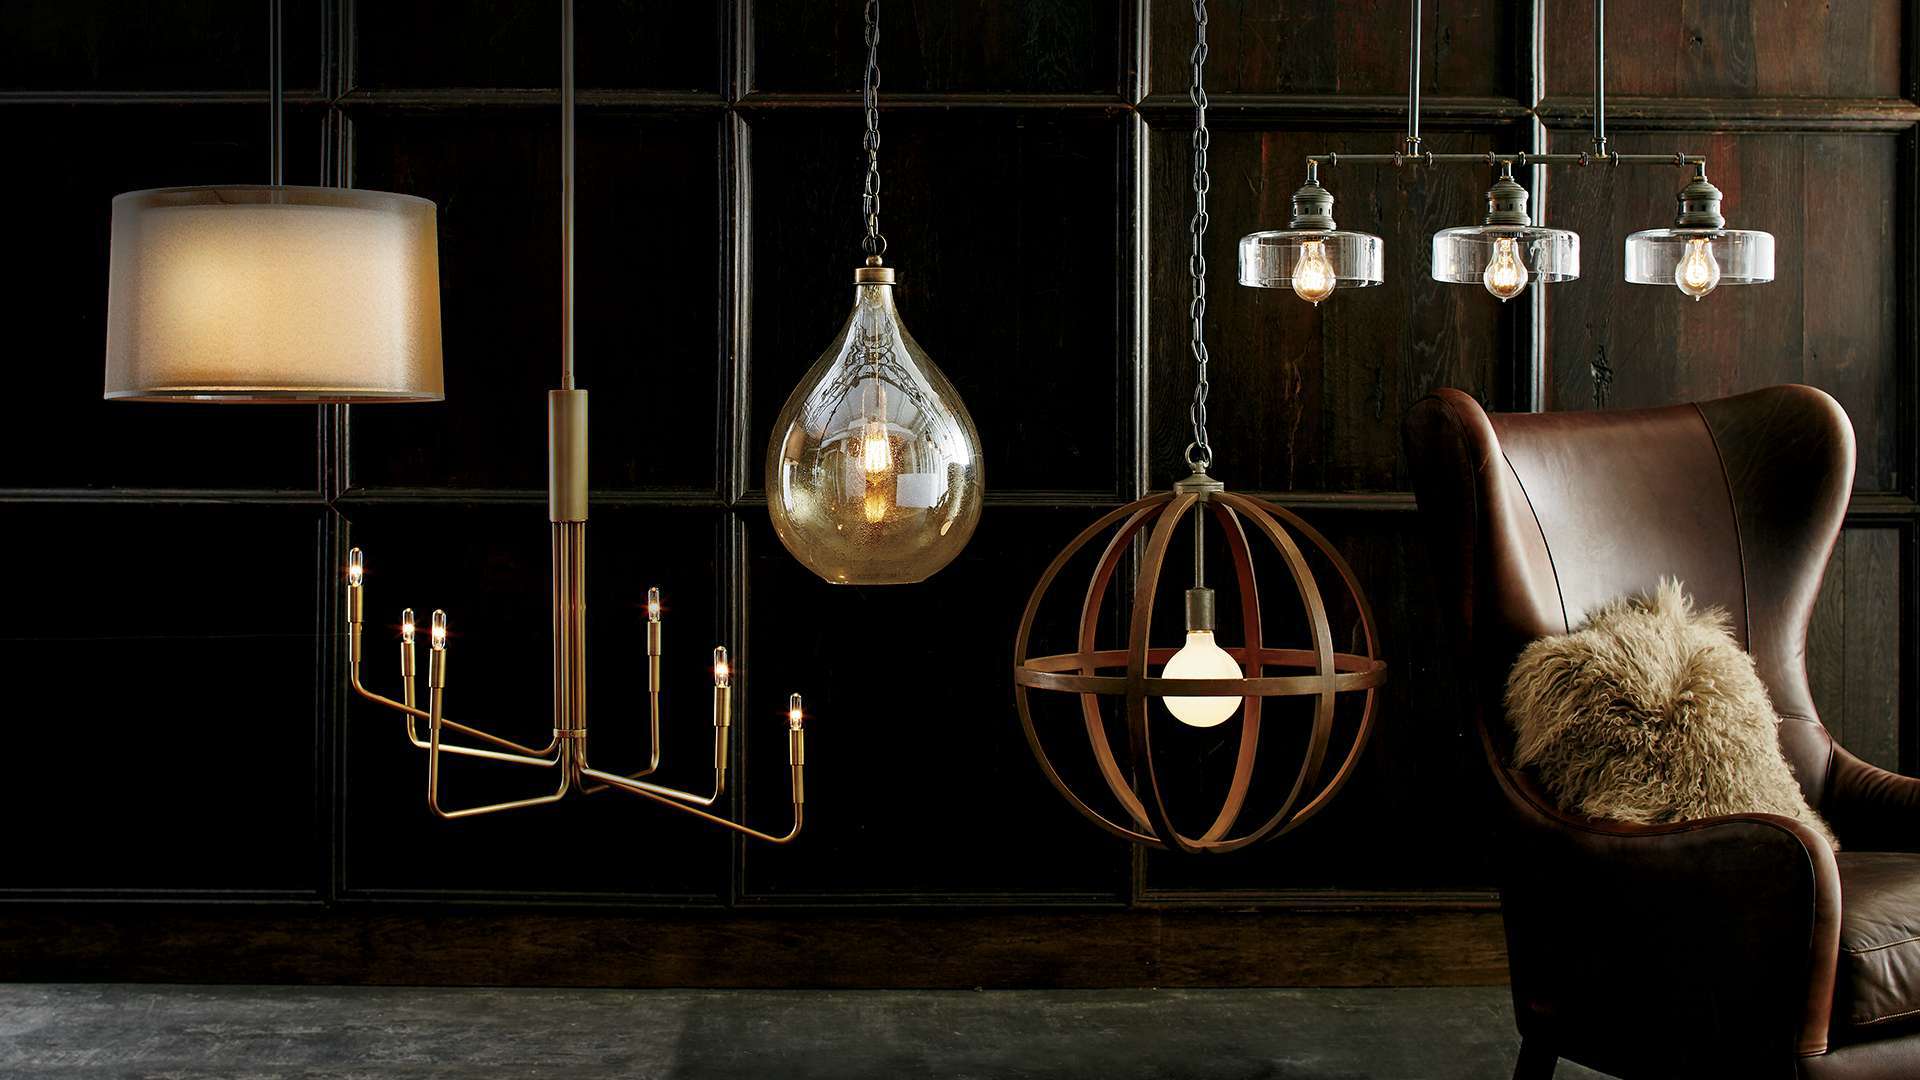 Multiple pendant lights hanging in a room with a leather chair